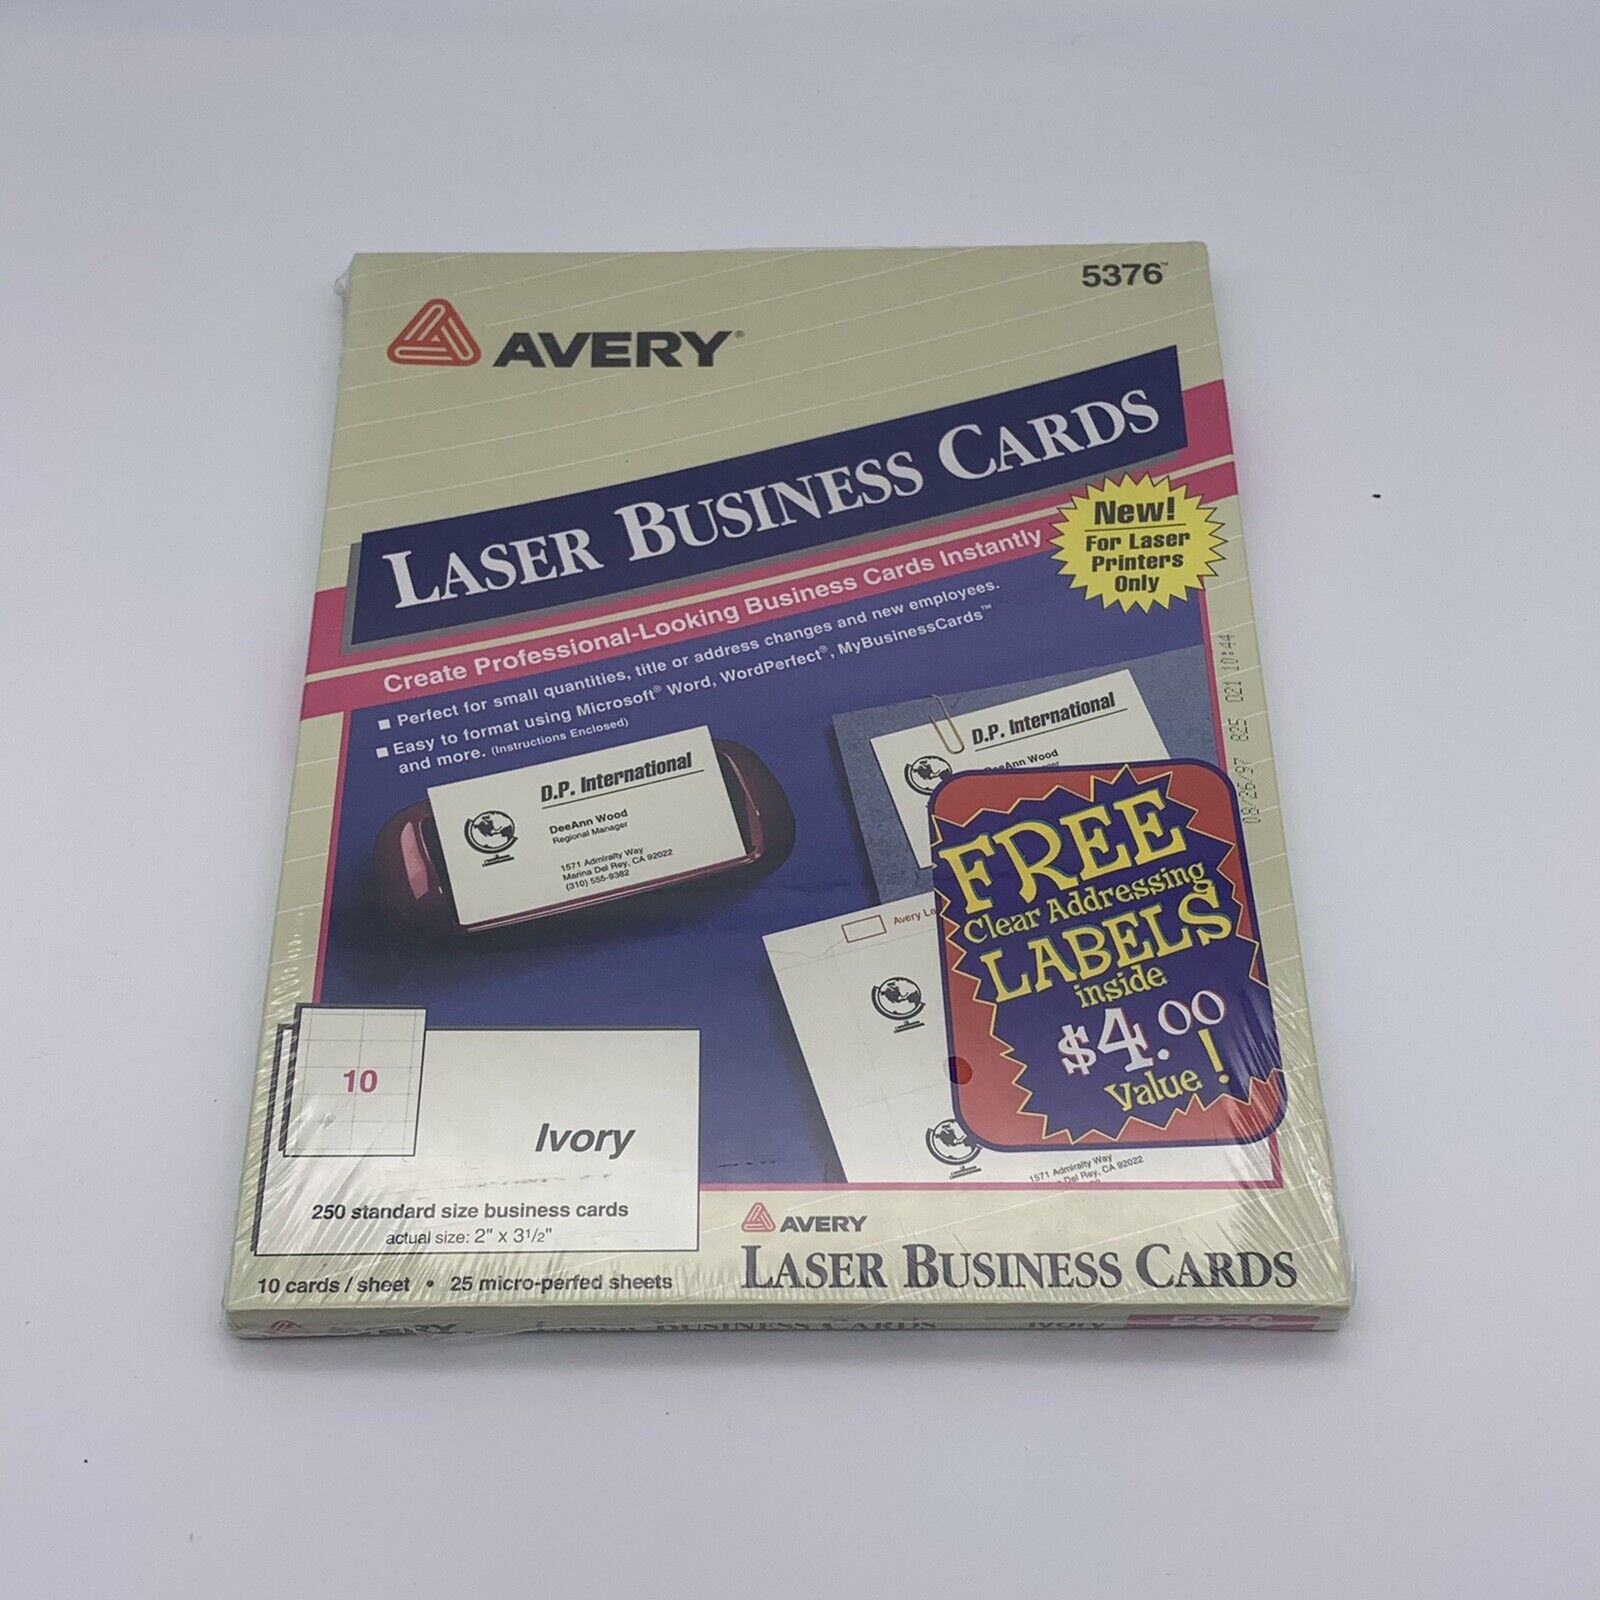 Avery Laser Microperforated Business Cards, 2"x 3 1/2" Ivory, Pack Of 250 Sealed